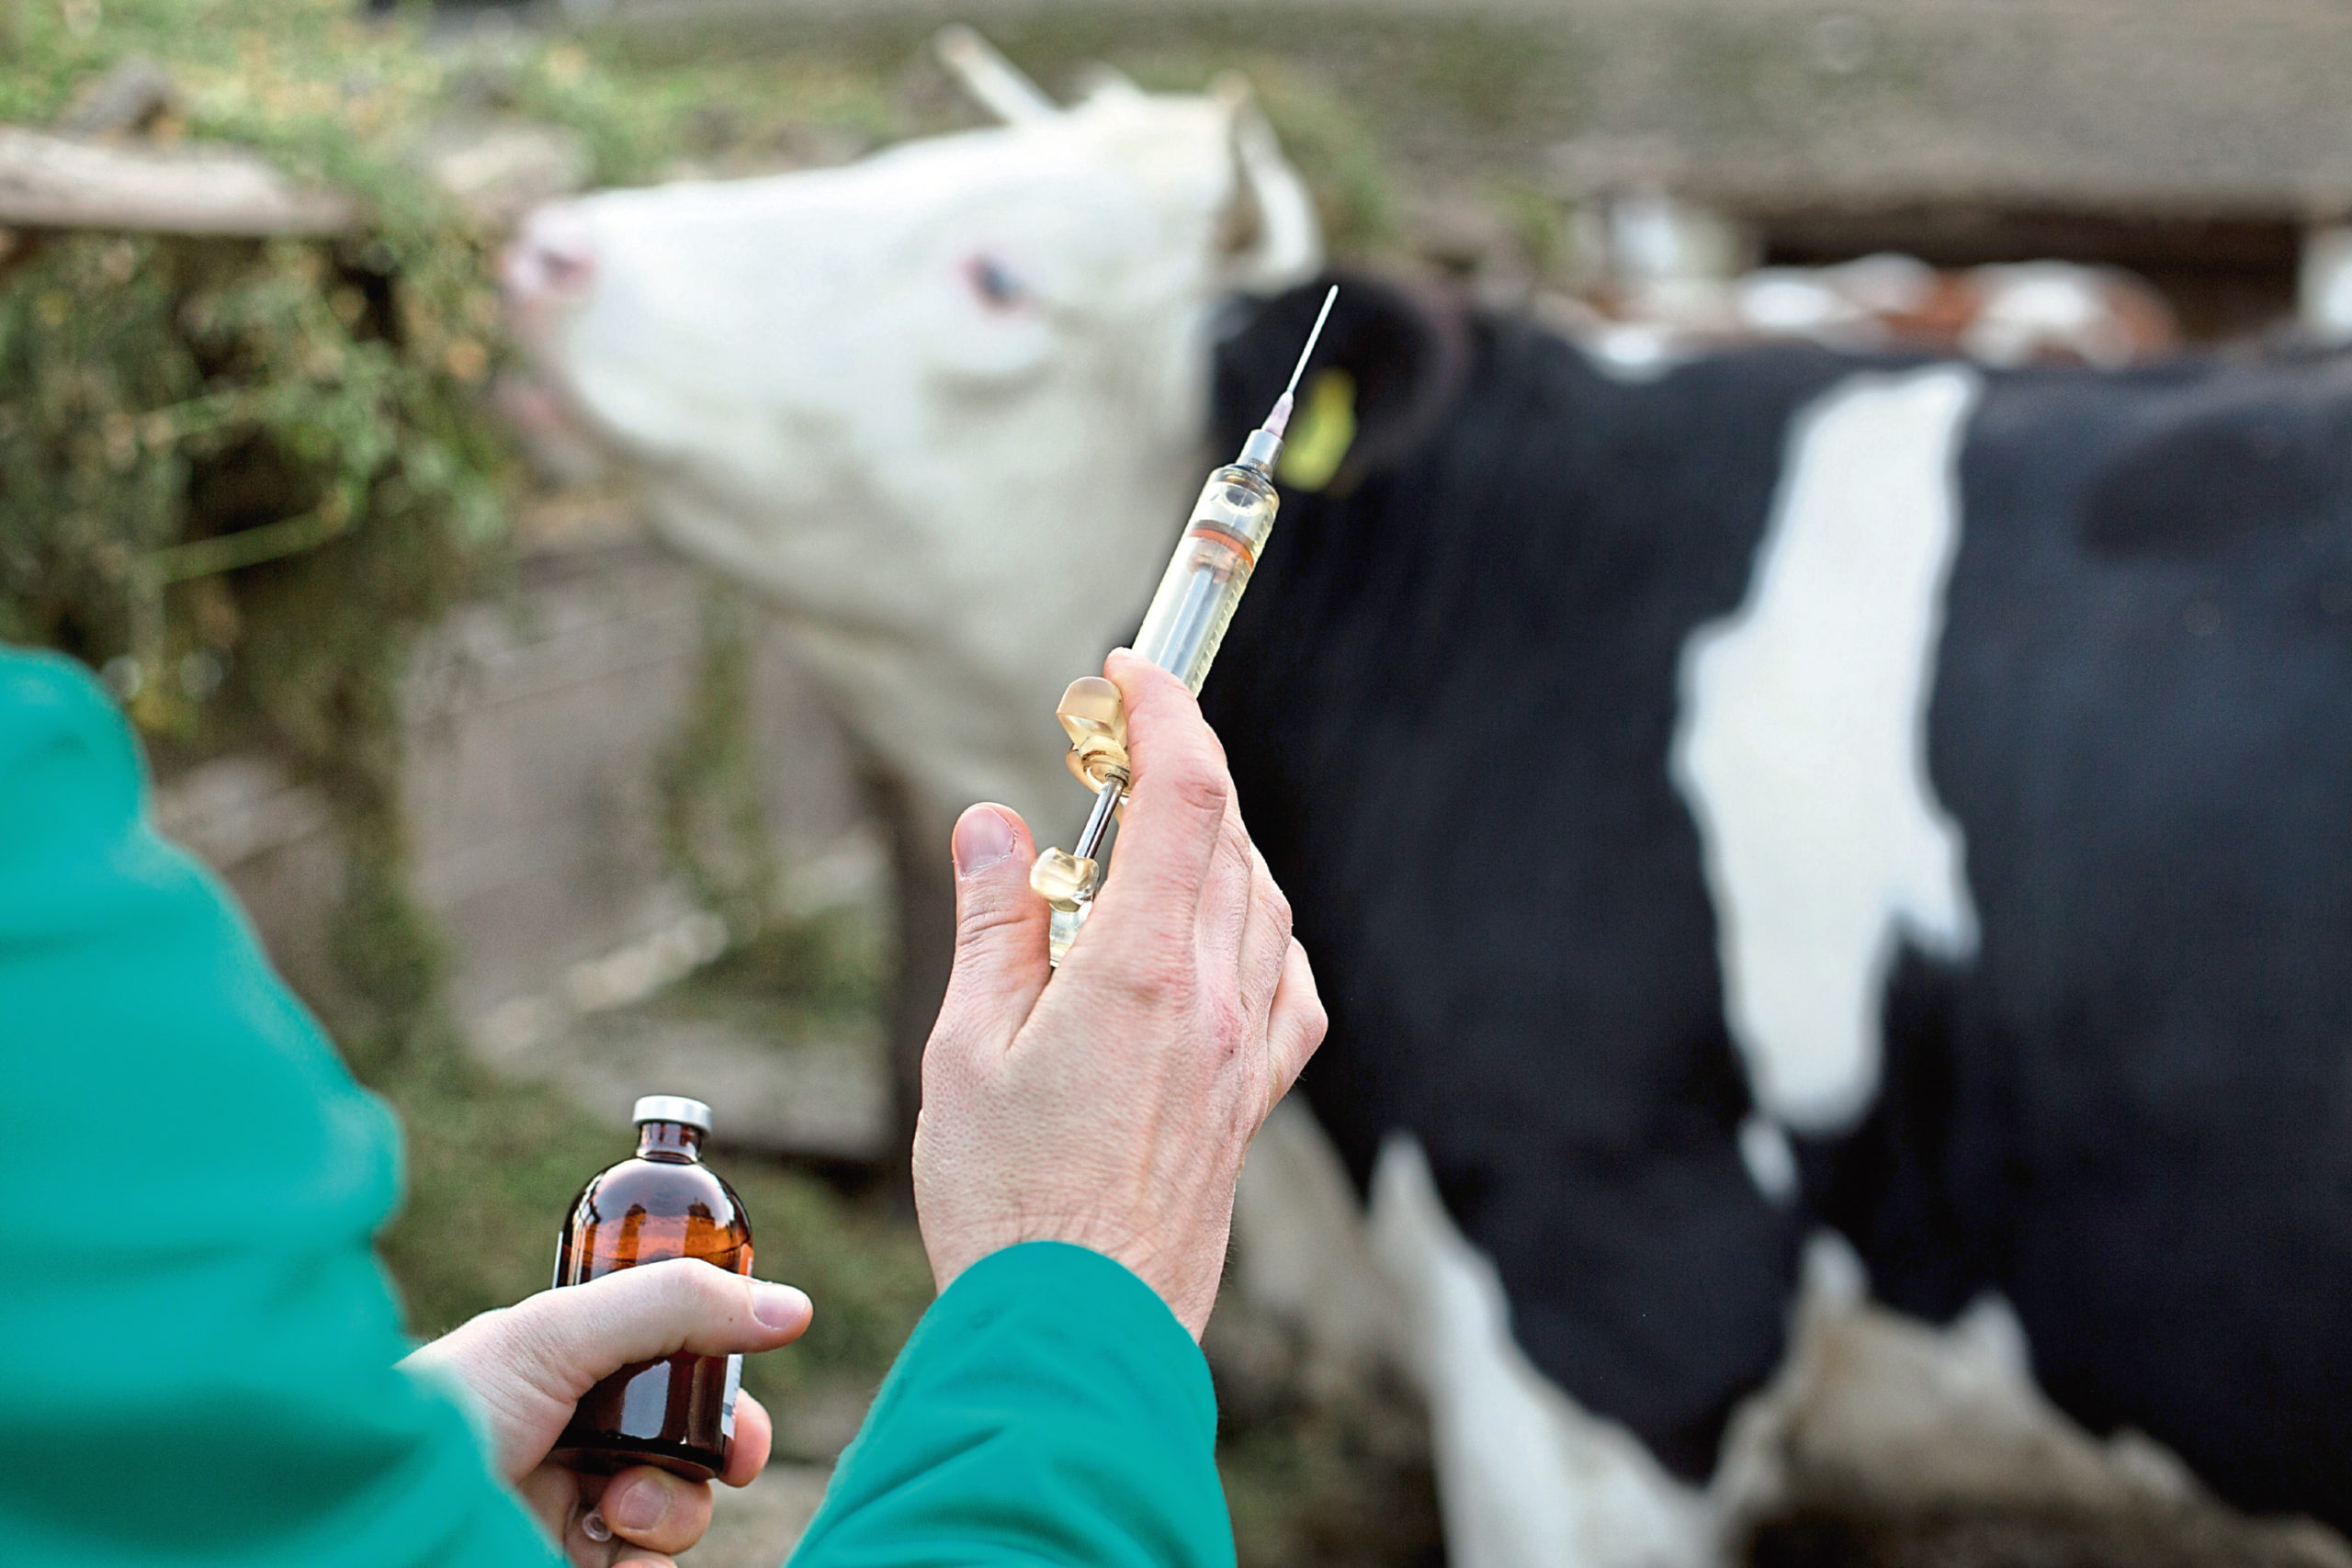 Close up of veterinarian hand holding syringe and bottle on farm with cow in background; Shutterstock ID 334708382; Purchase Order: -

cattle vaccine